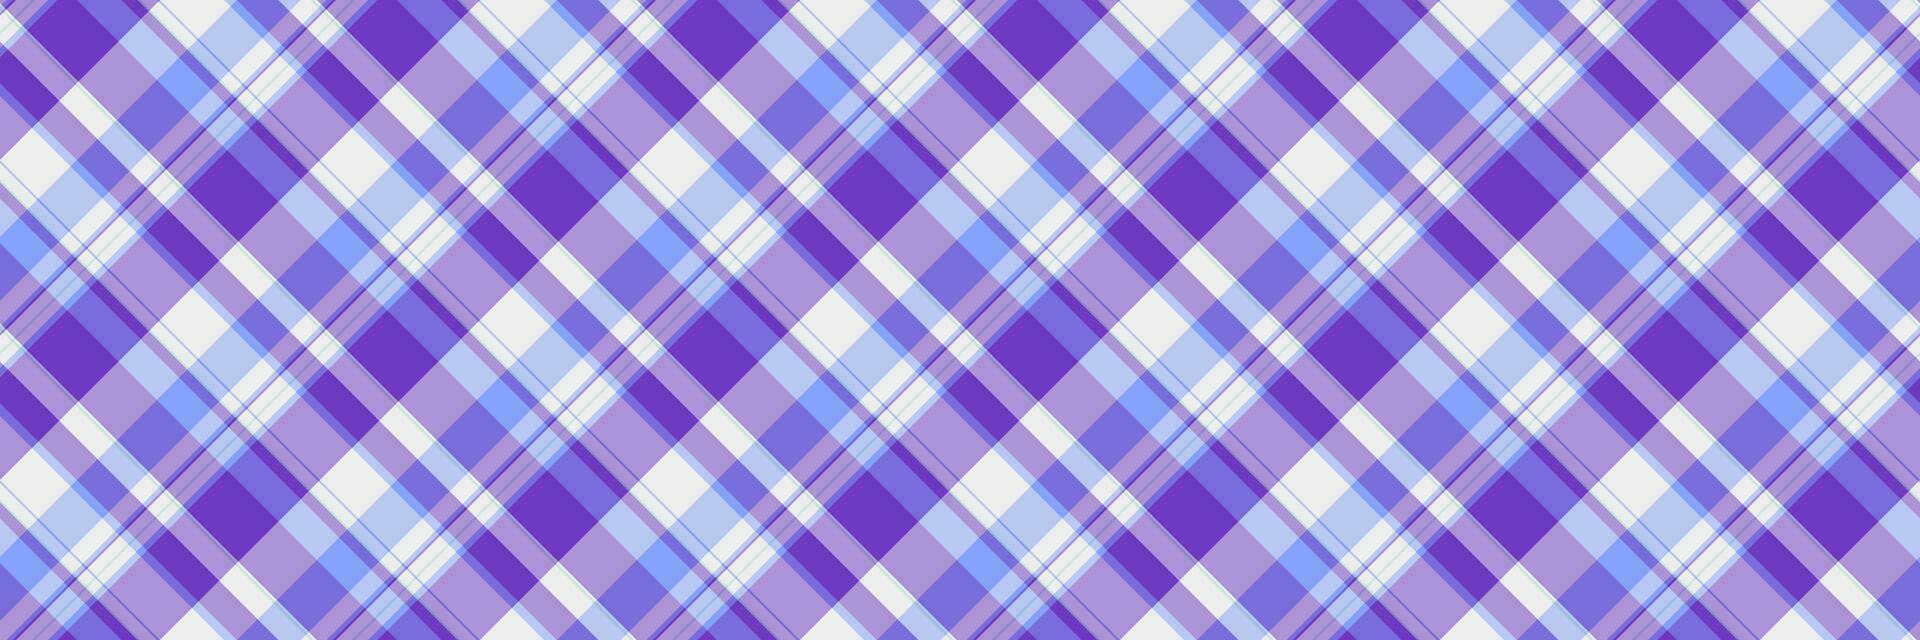 Table cloth plaid check pattern, scrap textile fabric tartan. Wide background seamless vector texture in violet and light colors.